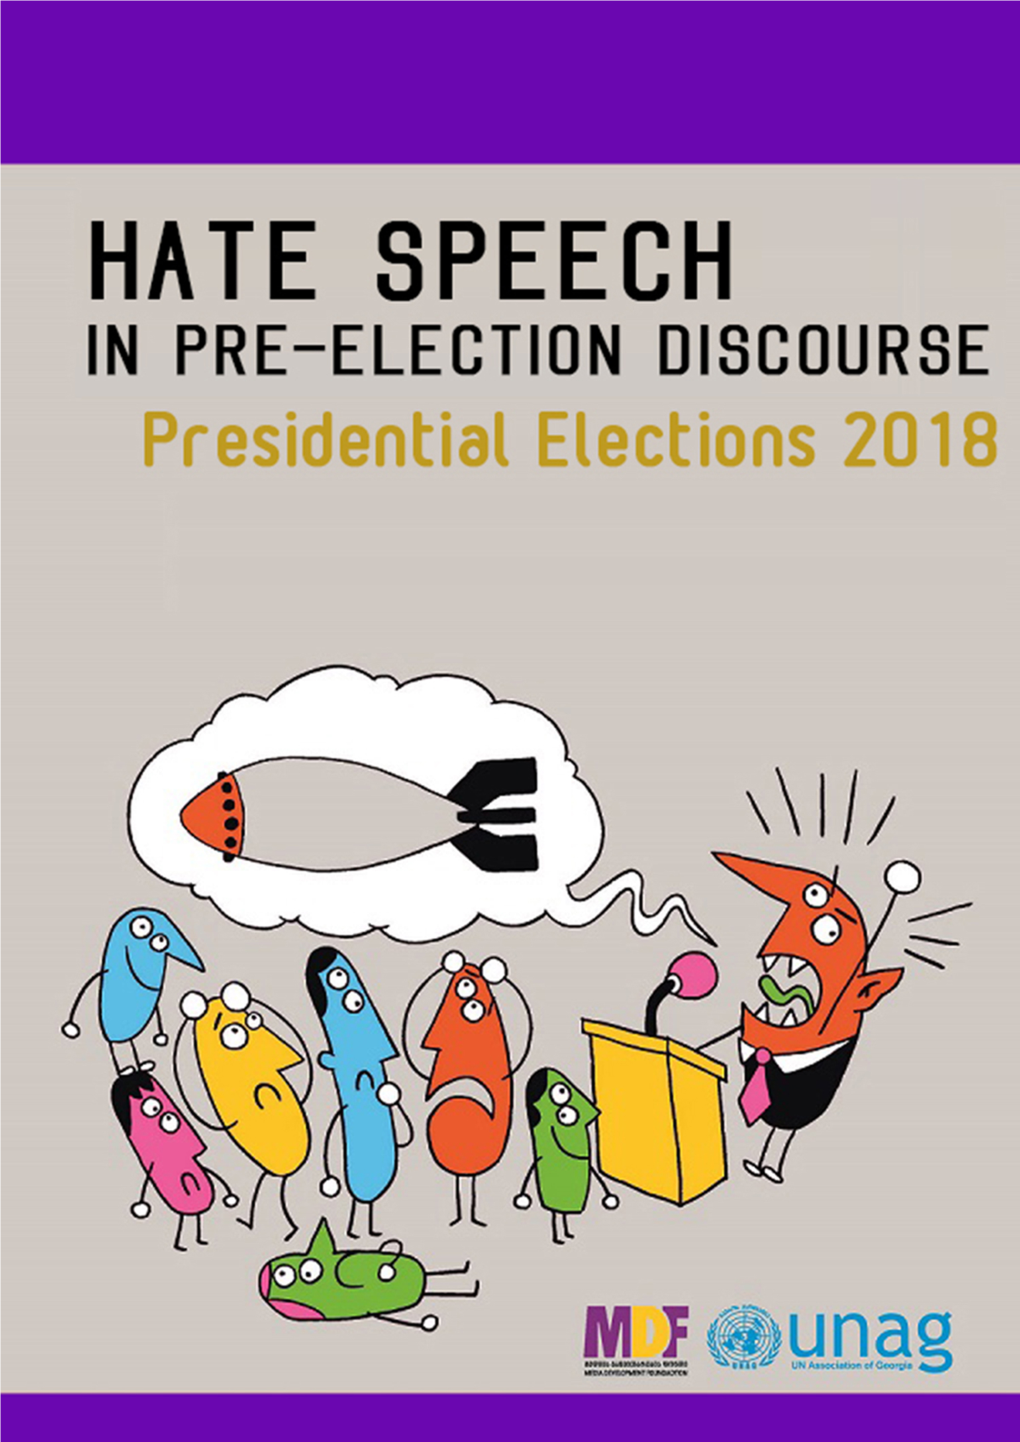 Hate Speech in Pre-Election Discourse, Presidential Elections 2018